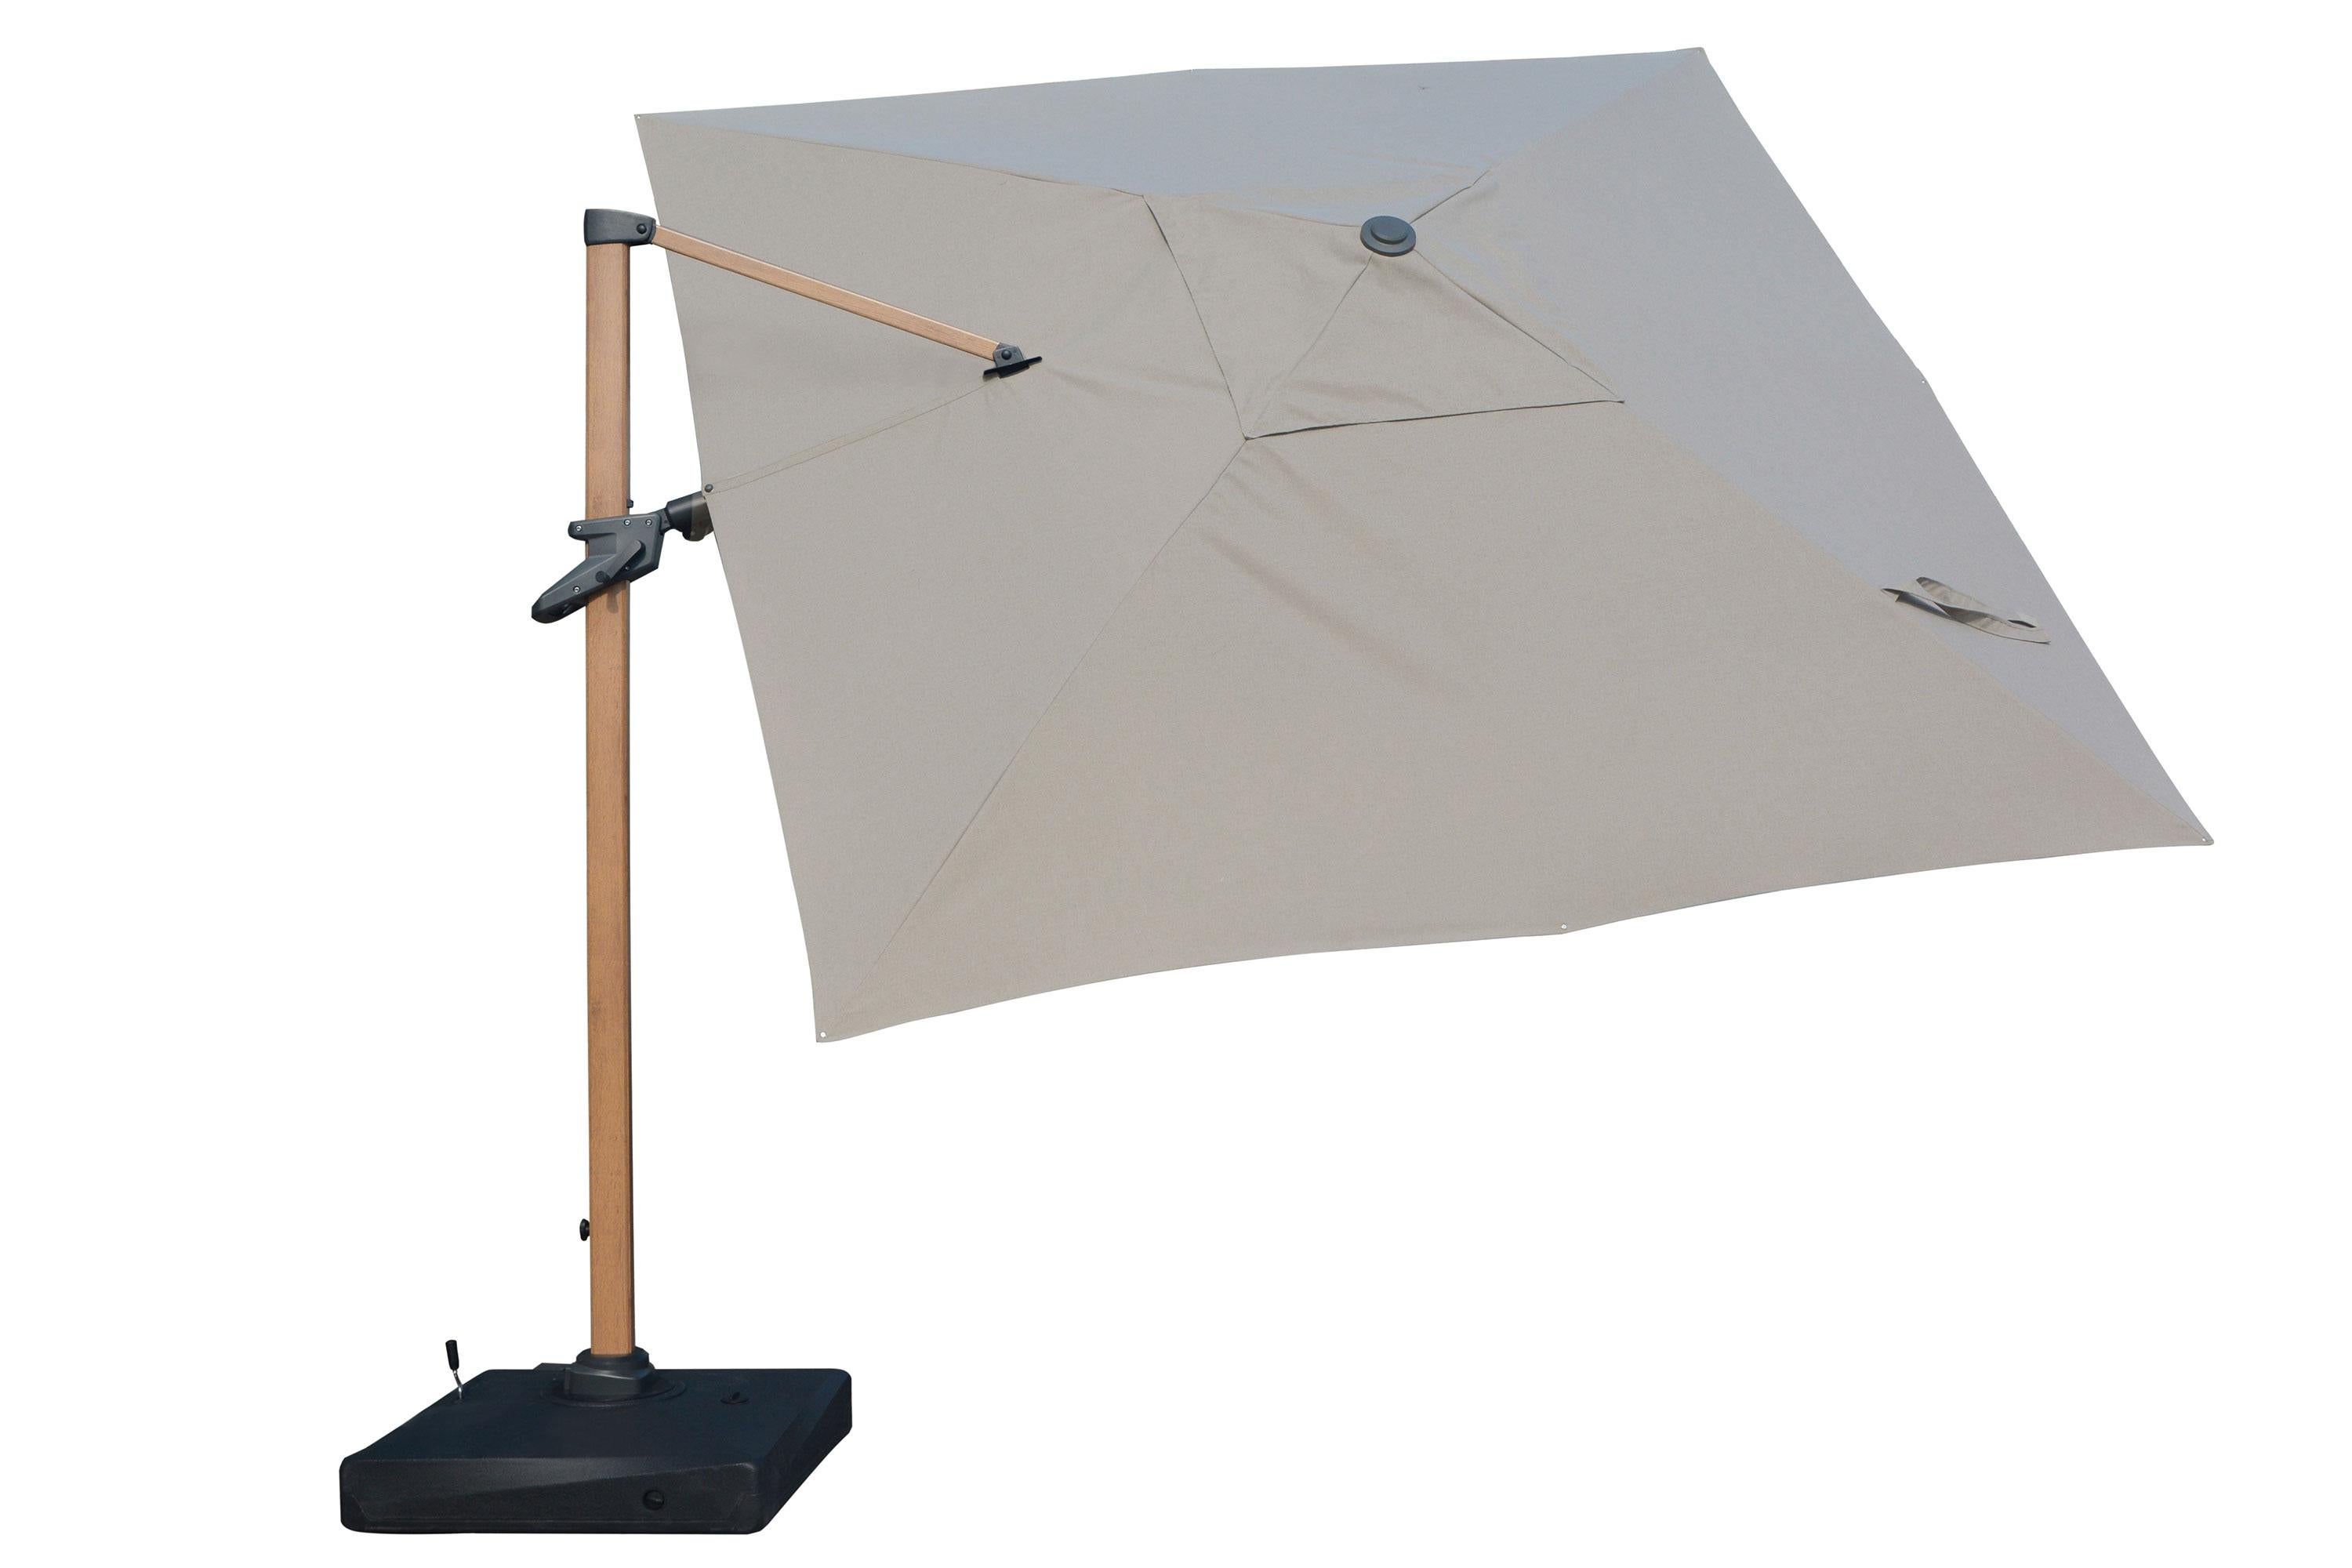 Claude Umbrella combines UV-resistant and wind-resistant special fabric and aluminum skeleton synthesis with modern design lines. While creating a modern look with aesthetic refinement in your outdoor areas; Claude Umbrella, which allows you to